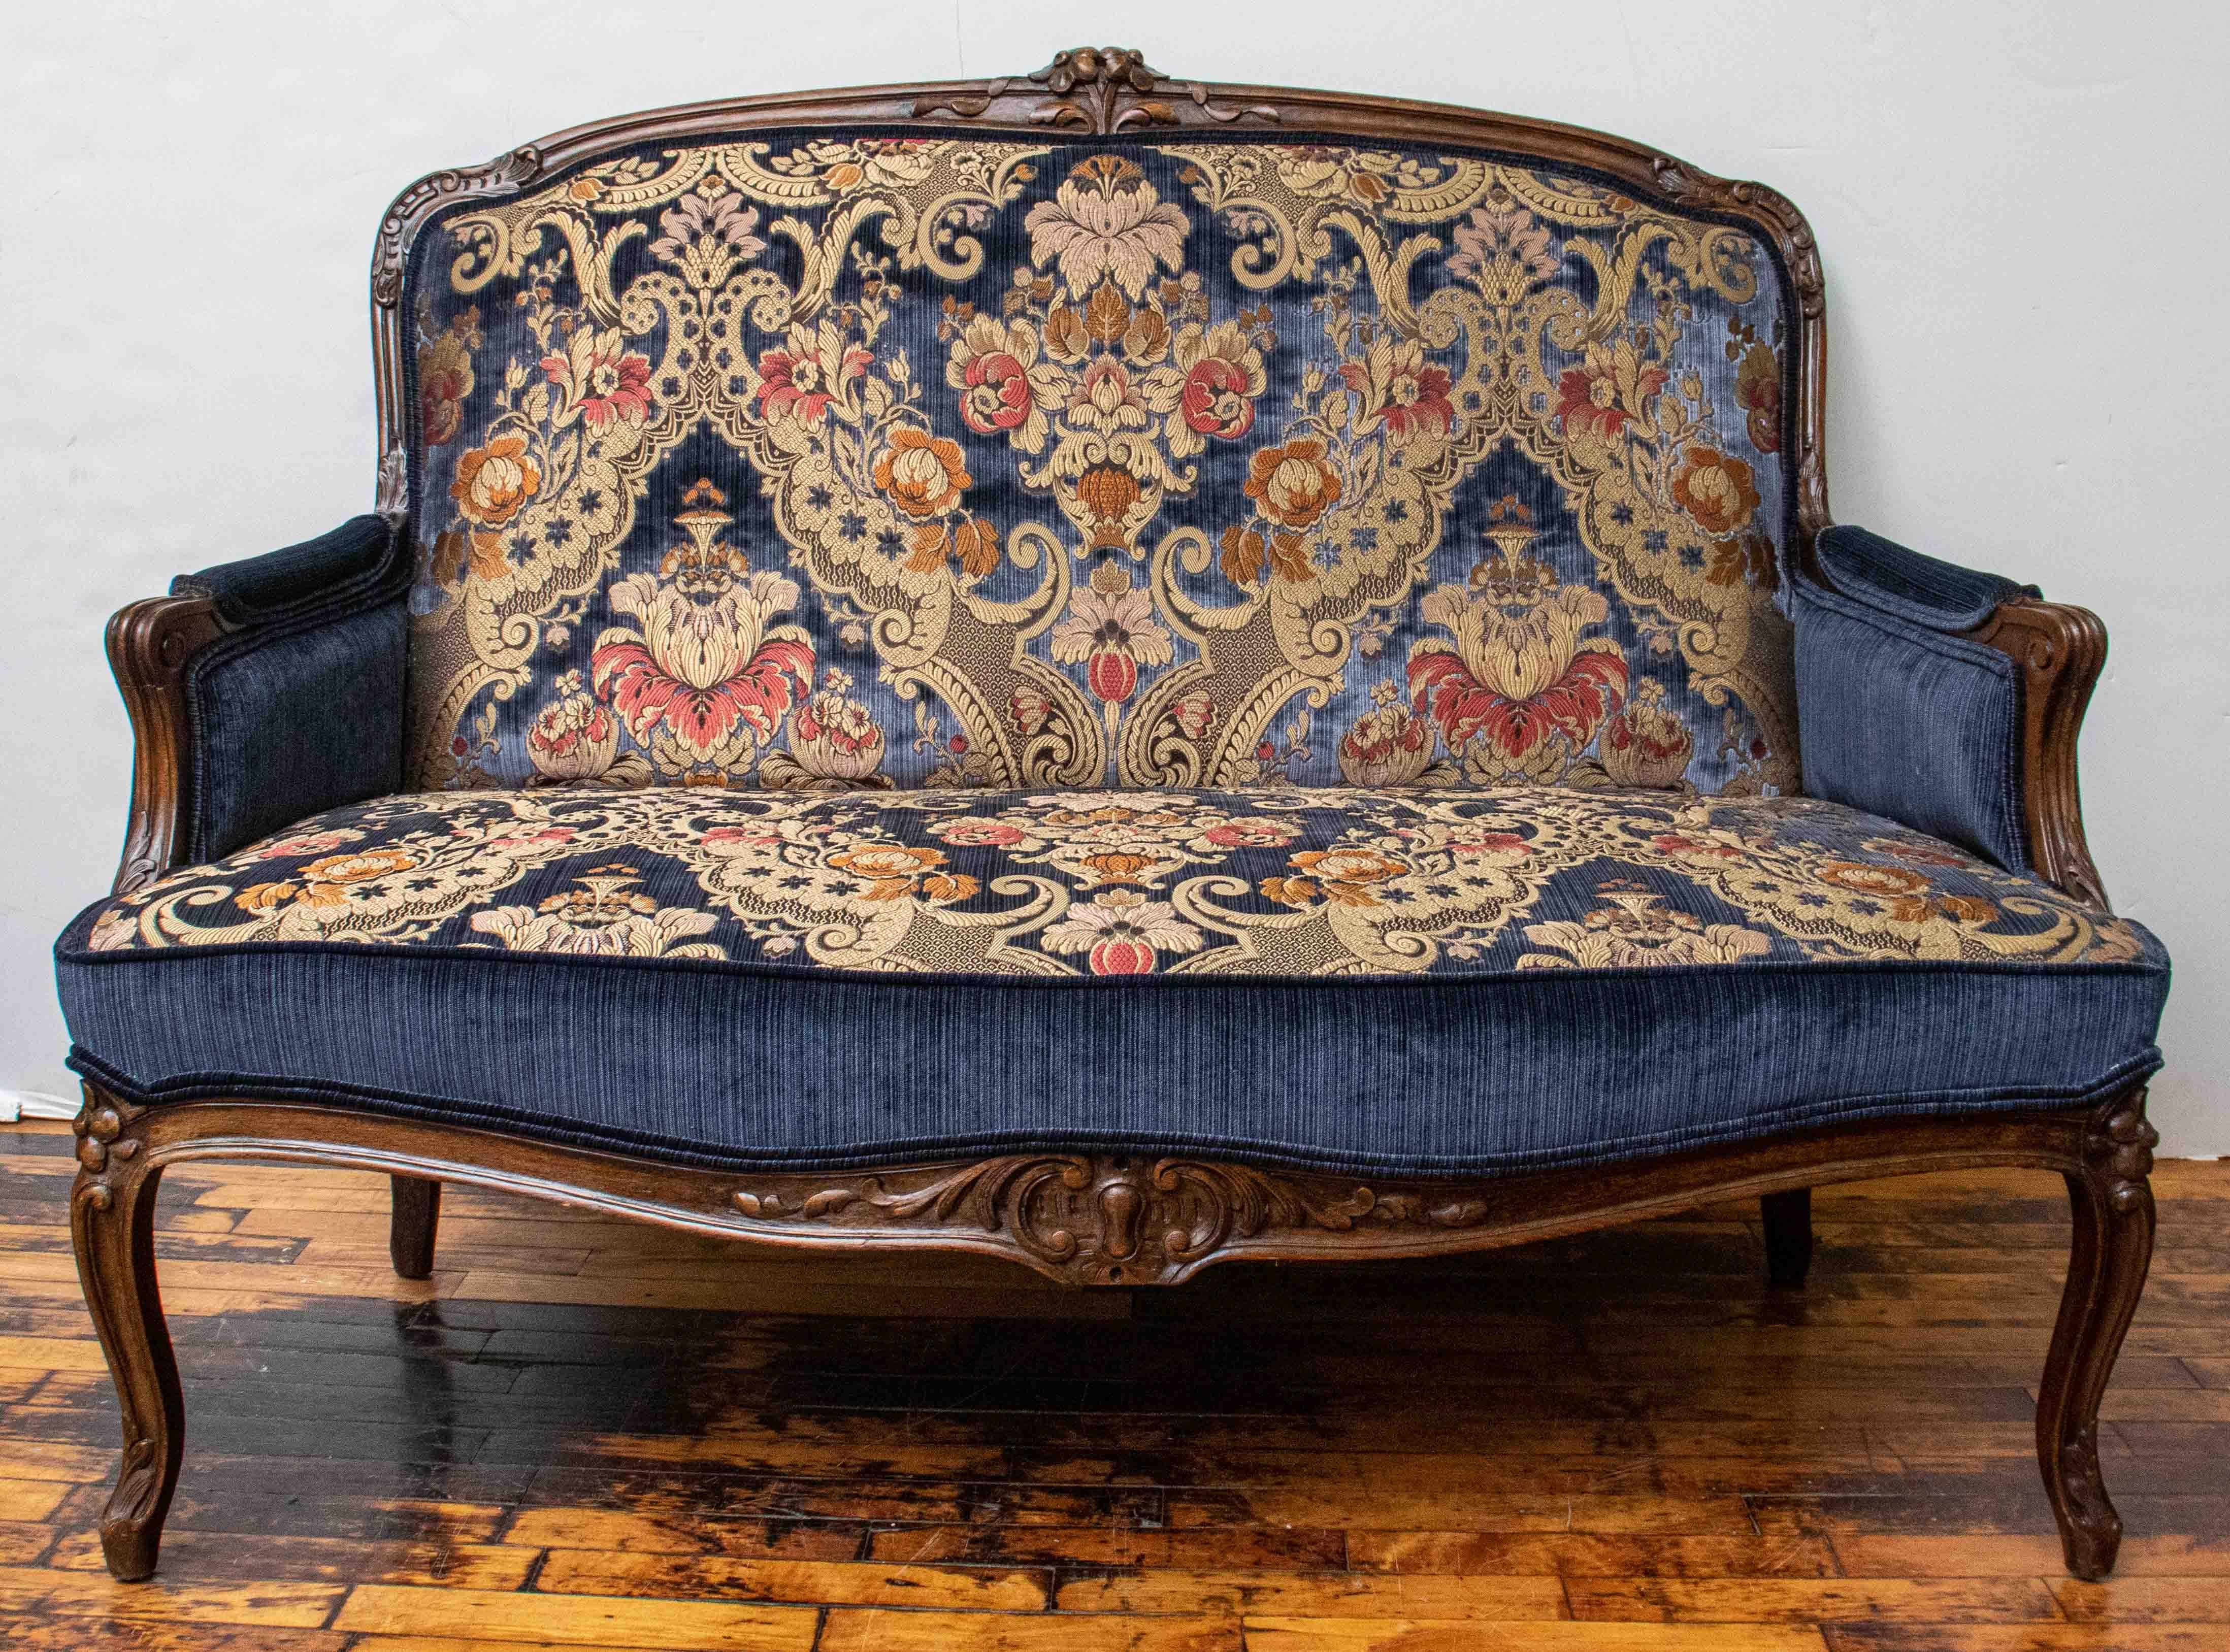 Antique handmade French settee with highly carved walnut wood frame. Recently upholstered in a Scalamandre brocade gold and blue fabric with coordinating blue strie velvet. Excellent antique condition. A real show stopper!